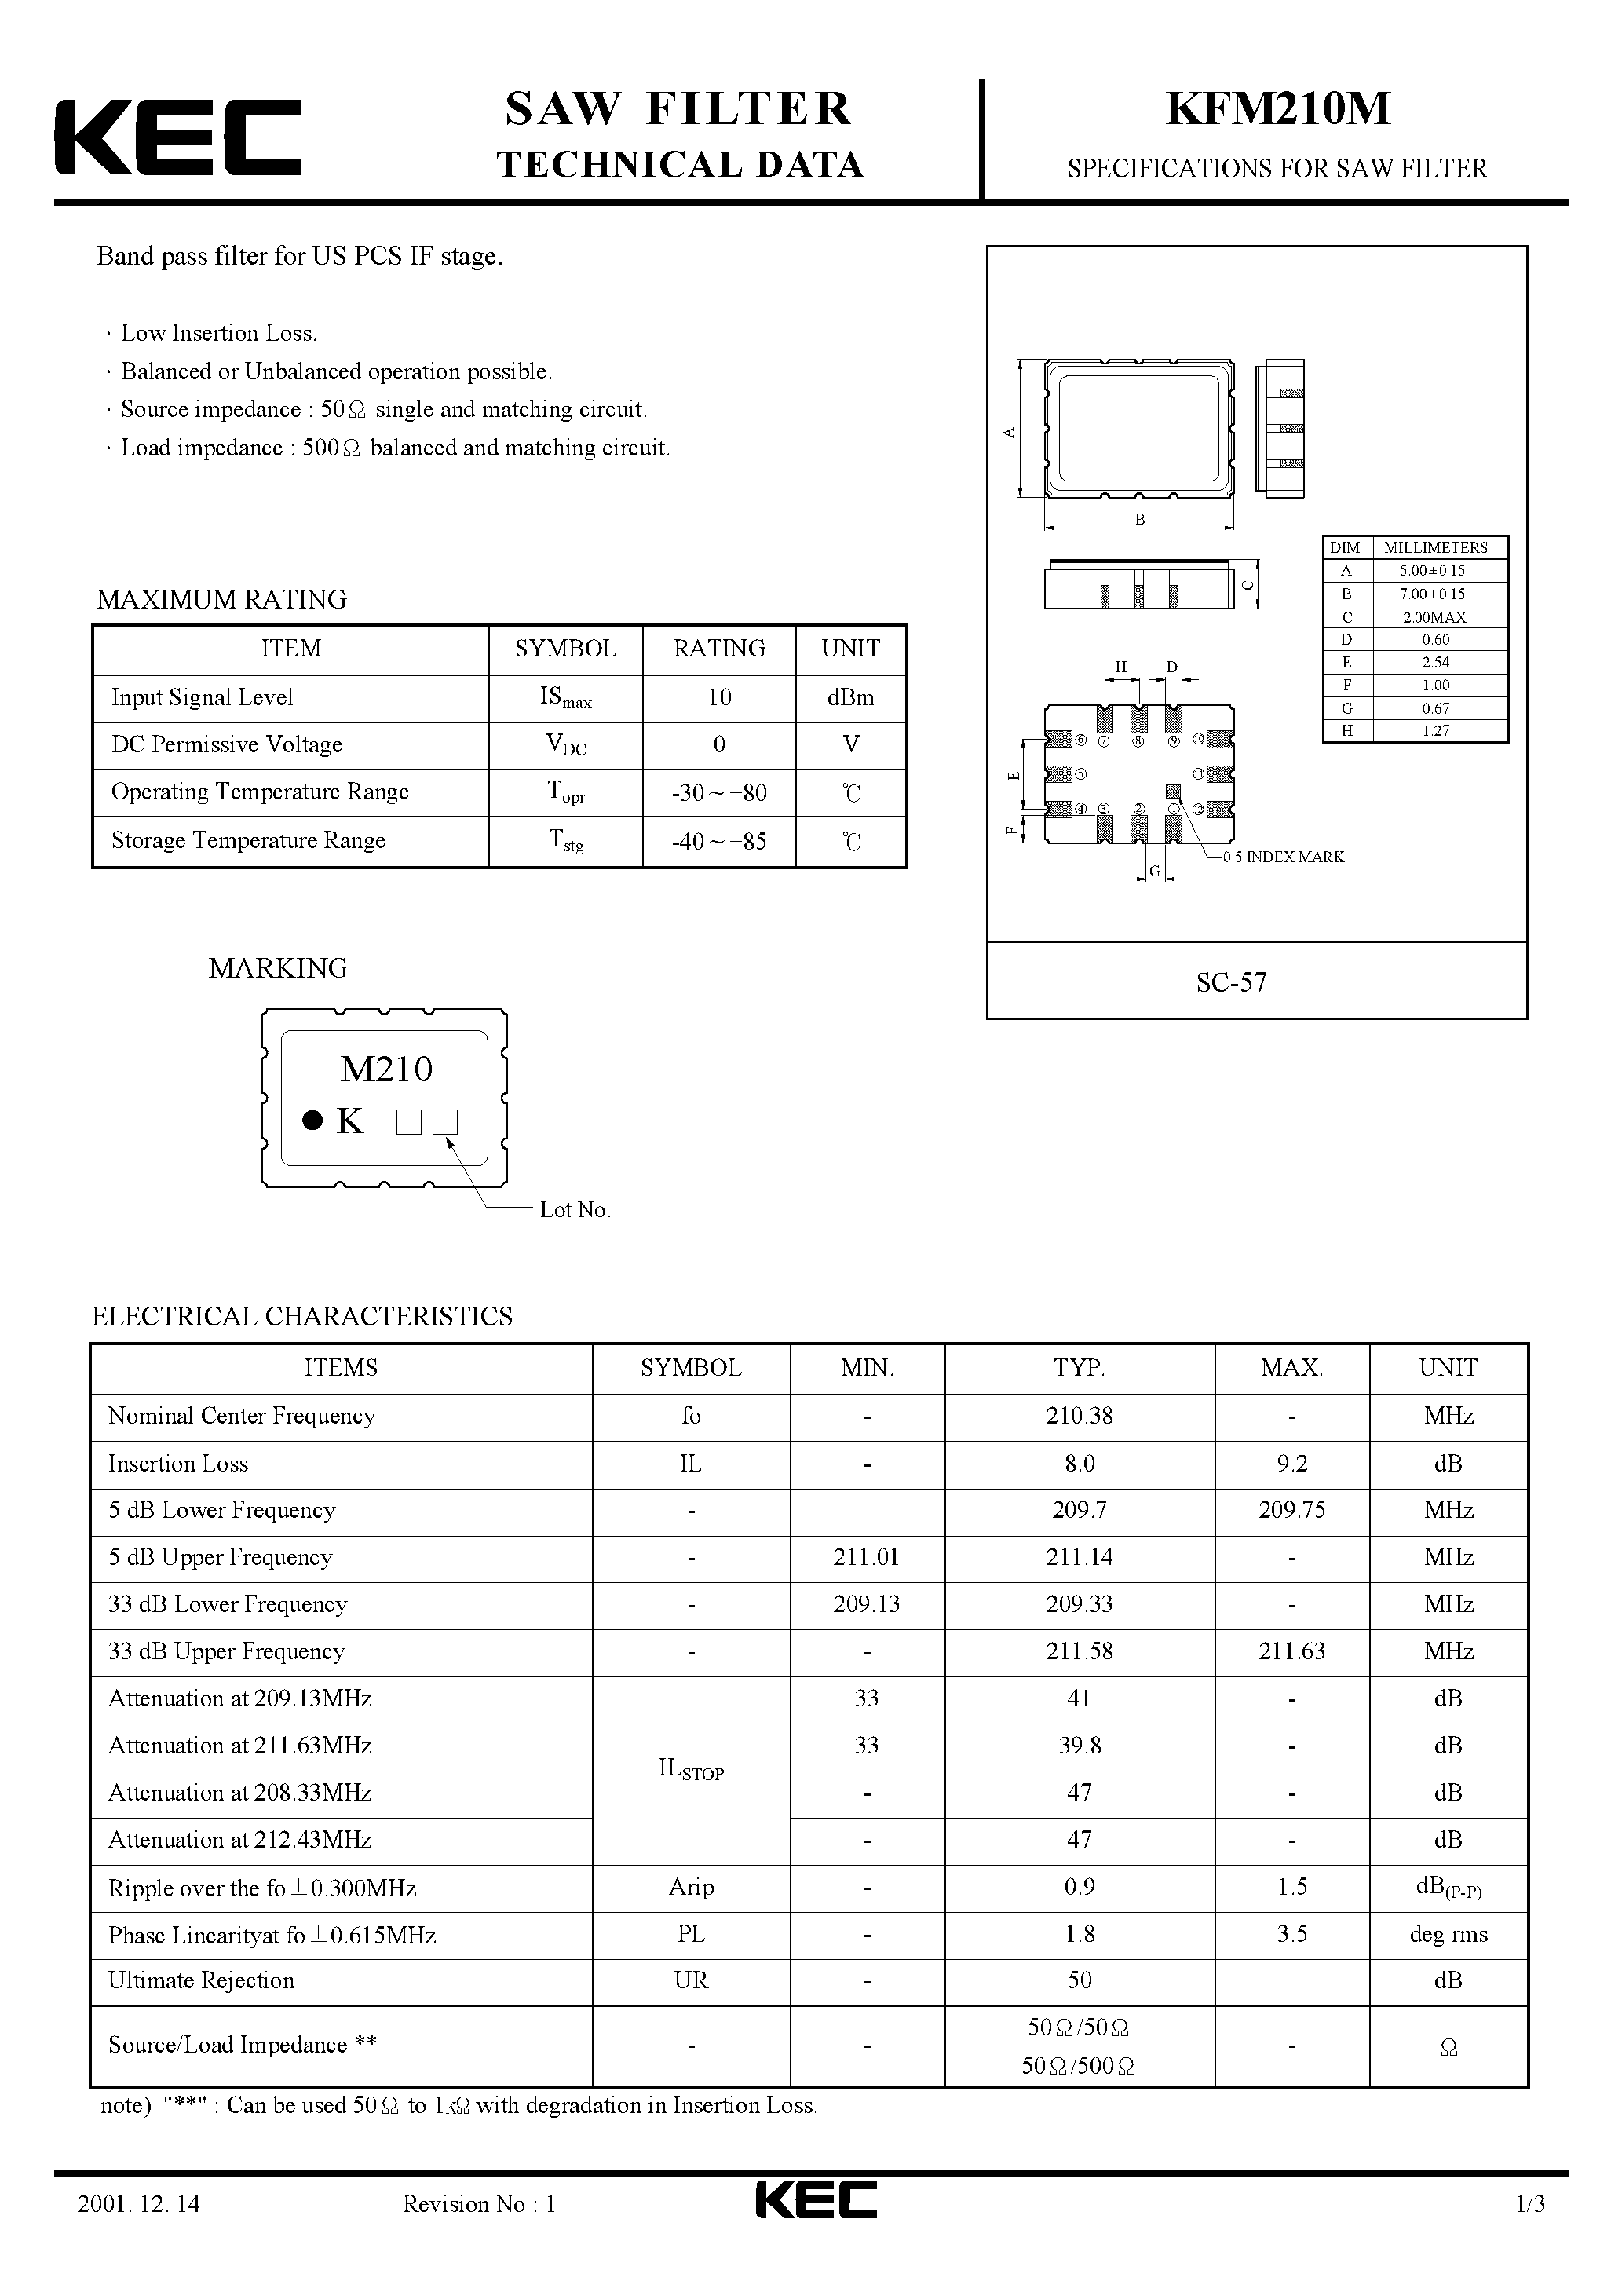 Даташит KFM210M - SPECIFICATIONS FOR SAW FILTER(BAND PASS FILTERS FOR US PCS IF STAGE) страница 1